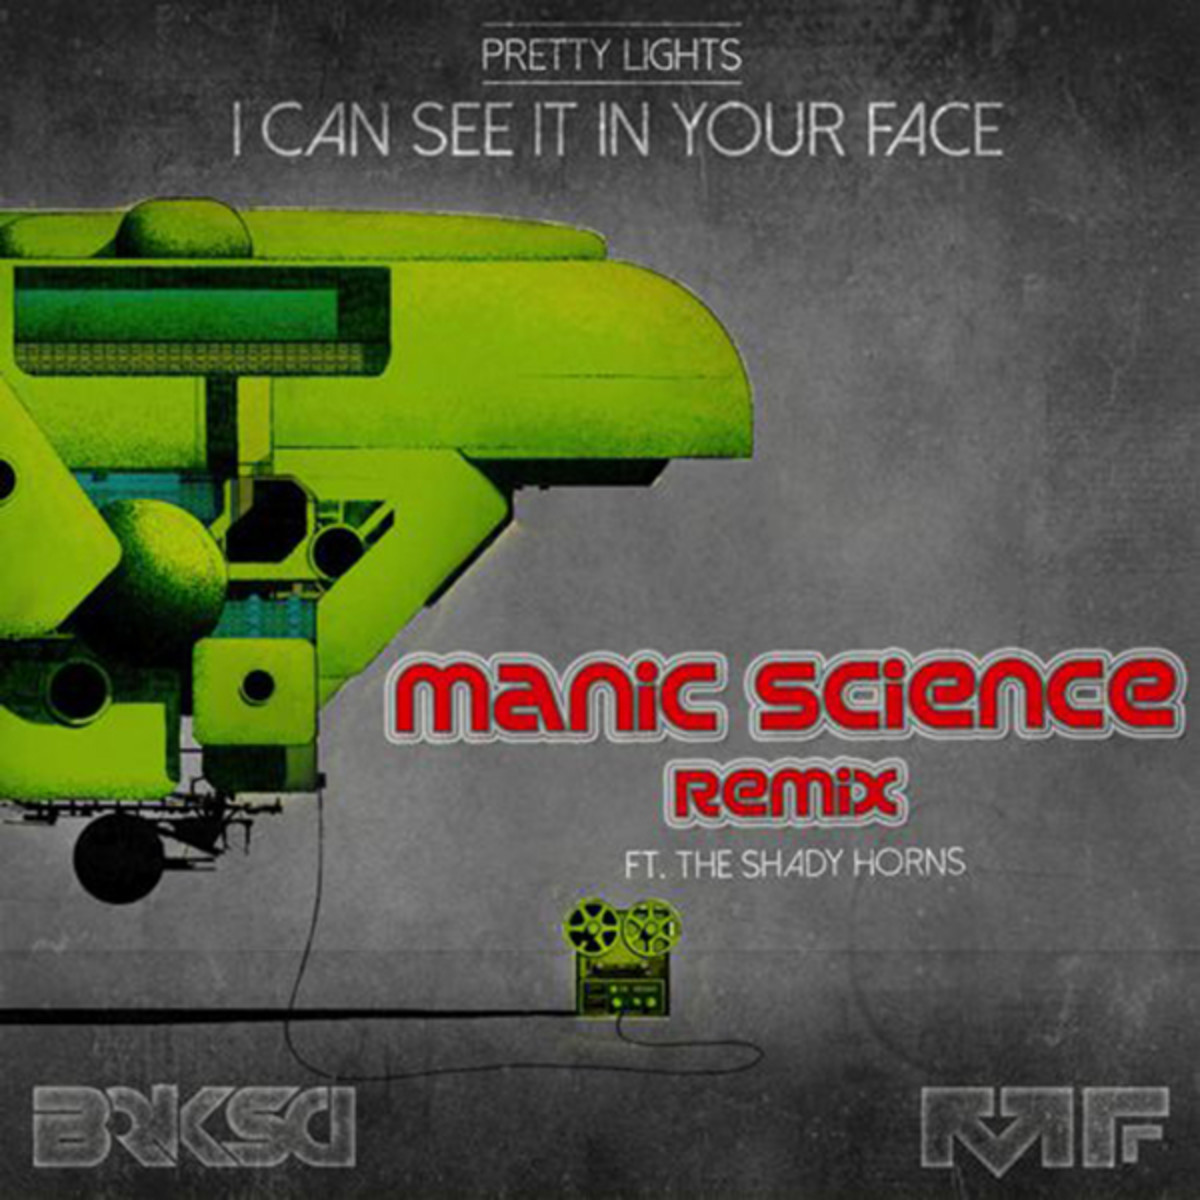 I-Can-See-It-Manic-Science-art-